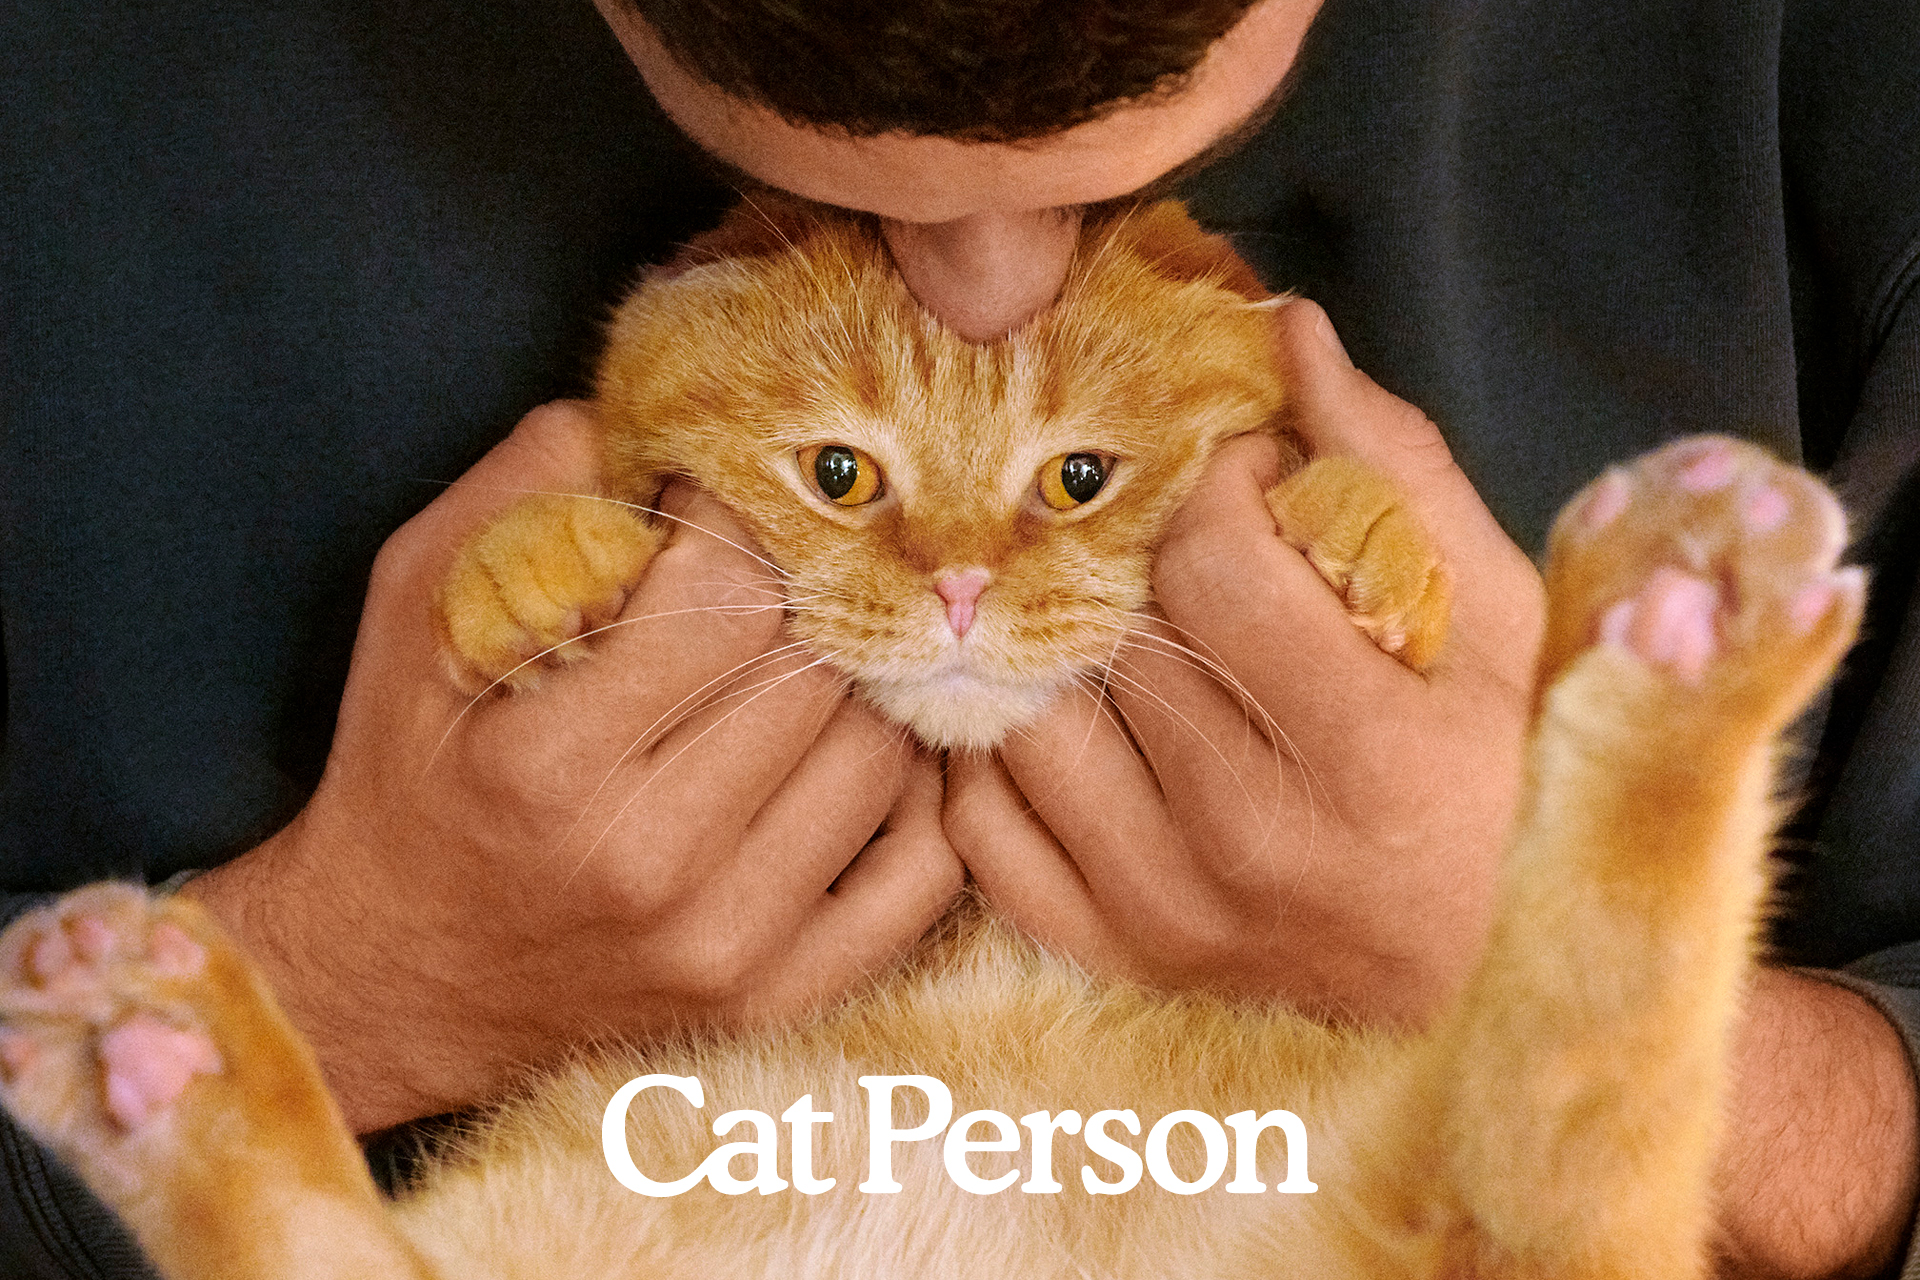 Cat Person: Brand Identity and Packaging Design